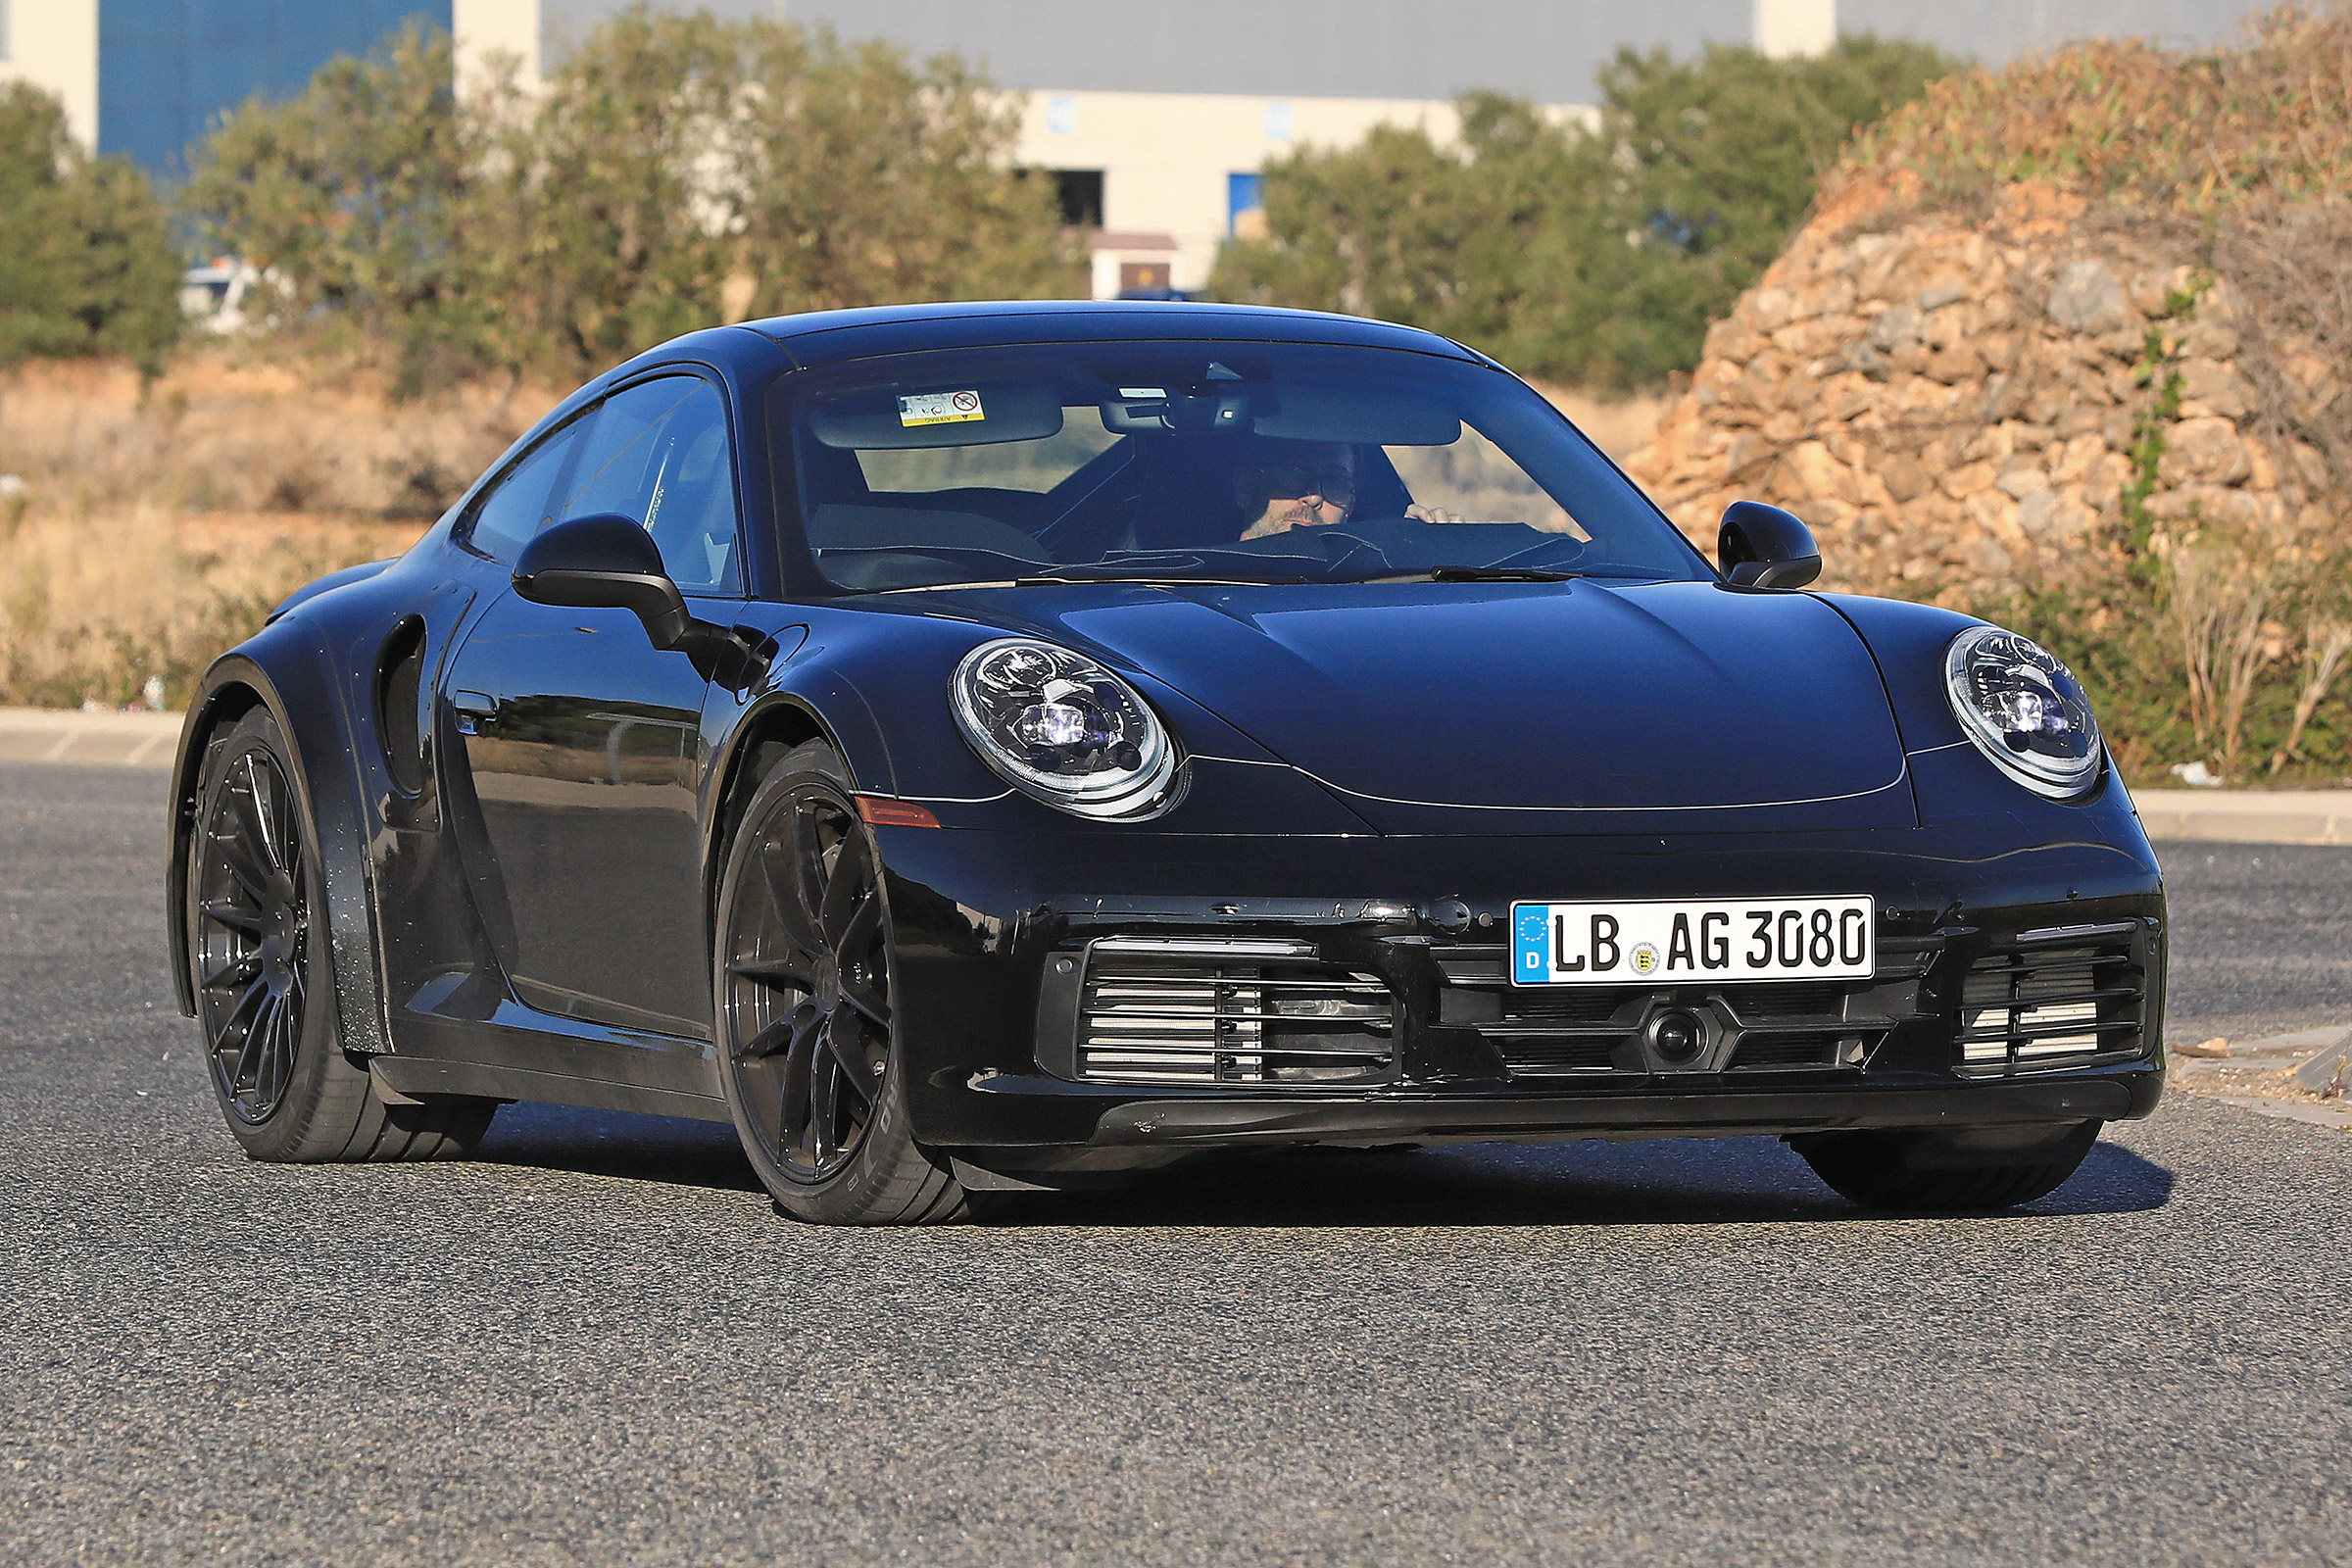 New 2019 Porsche 911 Turbo spied for the first time Auto